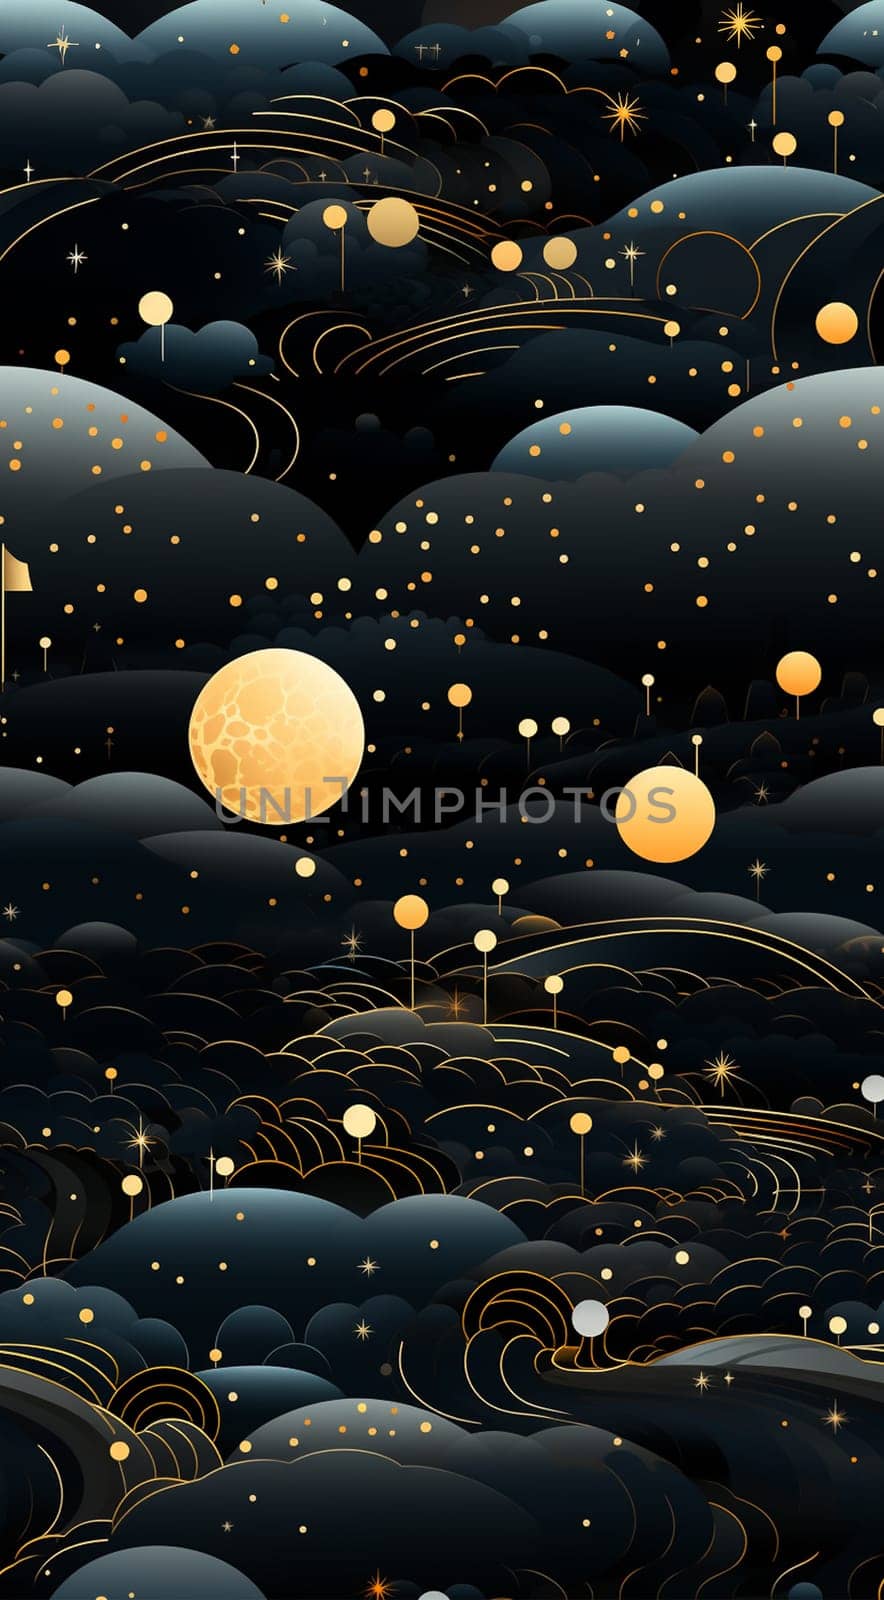 Cosmos galaxy space seamless pattern with planets, comets, constellations and stars. Night sky hand drawn doodle astronomical background for children. Animation design by Annebel146